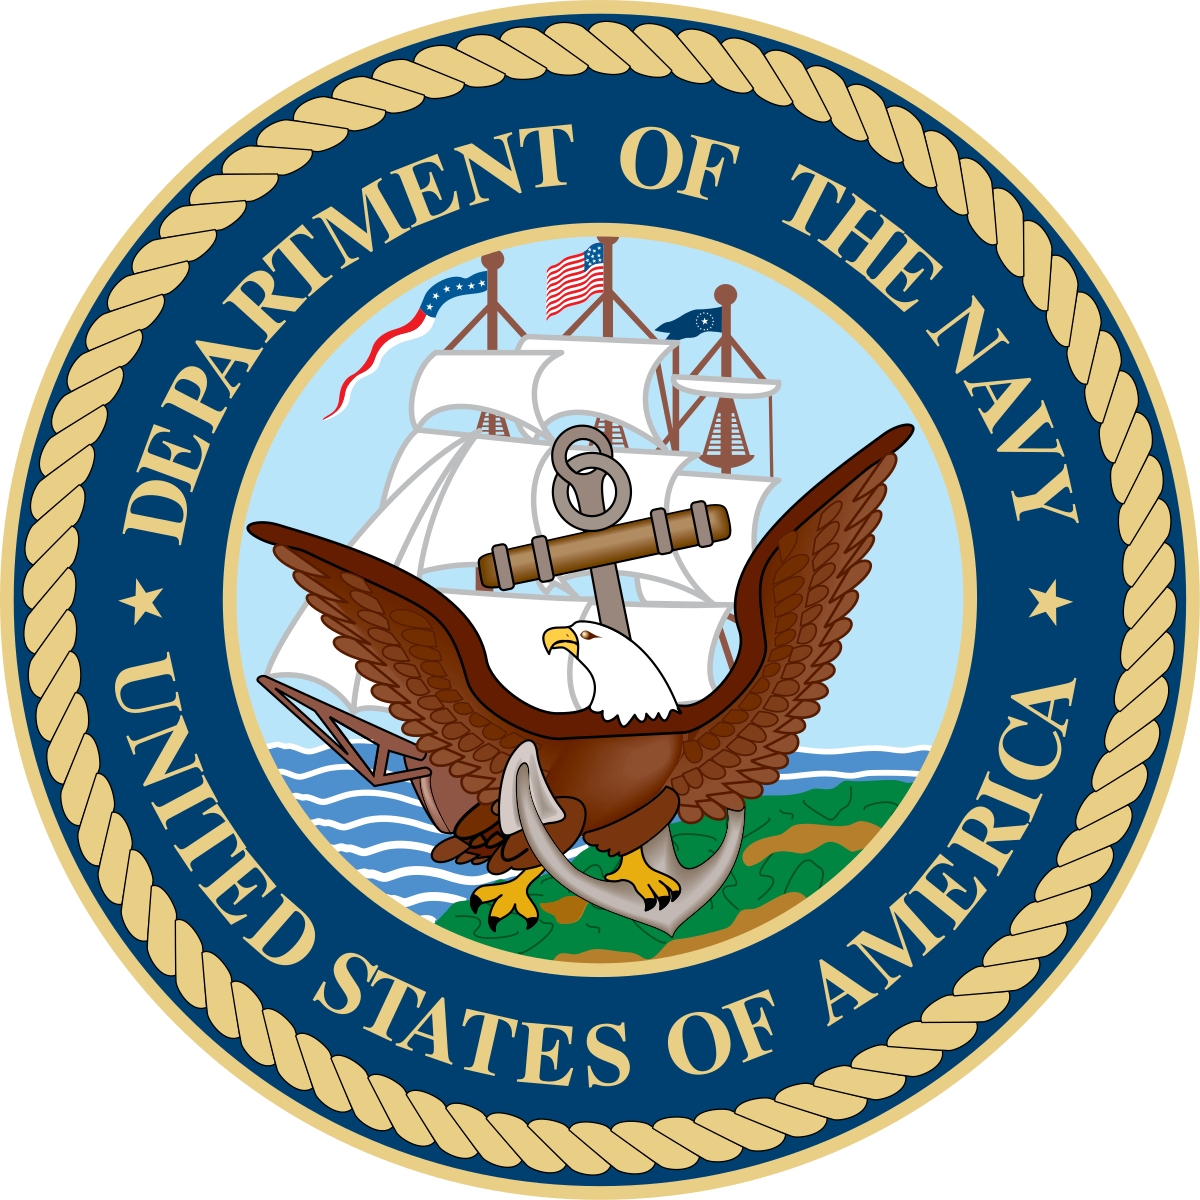 The United States Navy is the maritime service branch of the United States Armed Forces and one of the eight uniformed services of the United States.